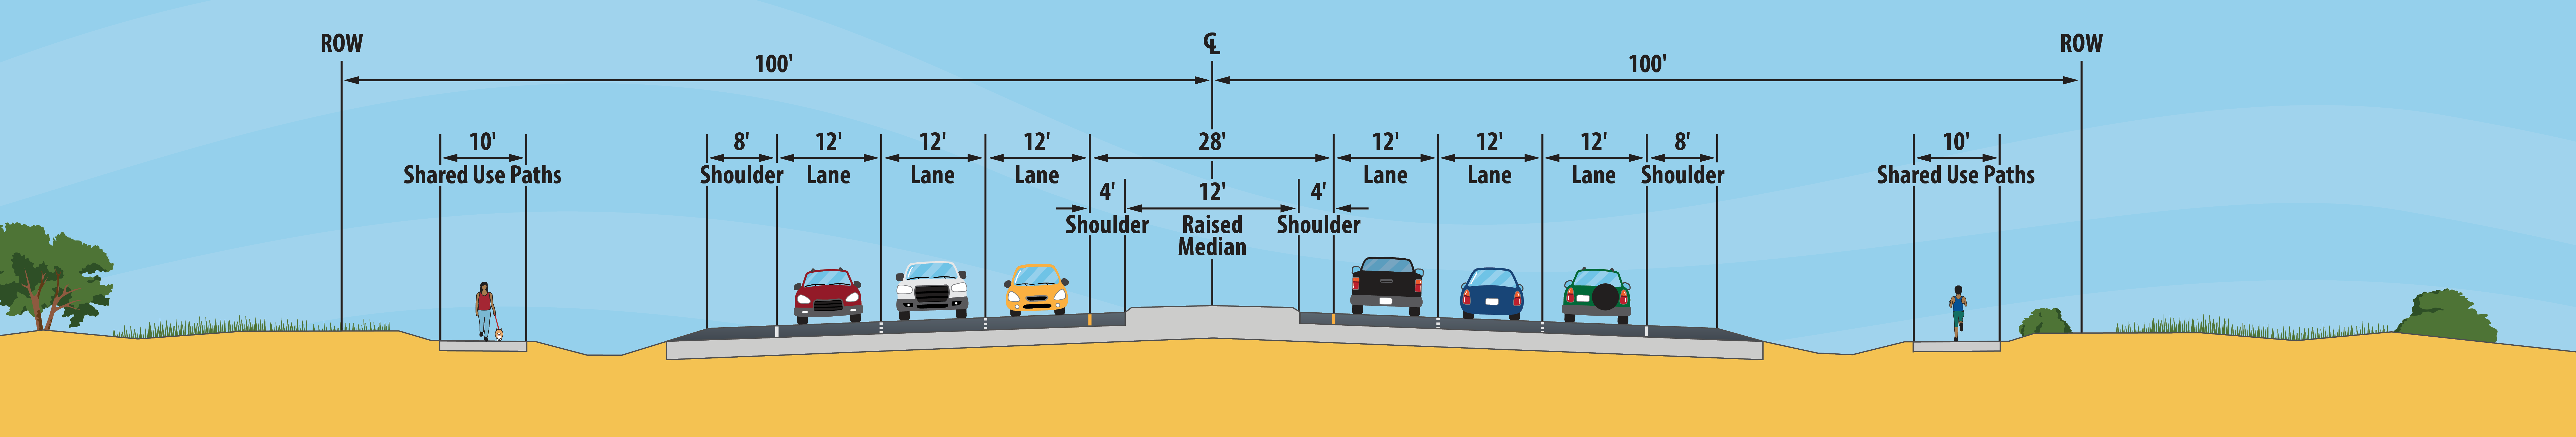 Typical cross section showing 200-foot area that includes right of way, two 10-foot shared use paths, two 8' shoulders, three 12-foot travel lanes in each direction, one 14-foot median, grass, trees, and sky.